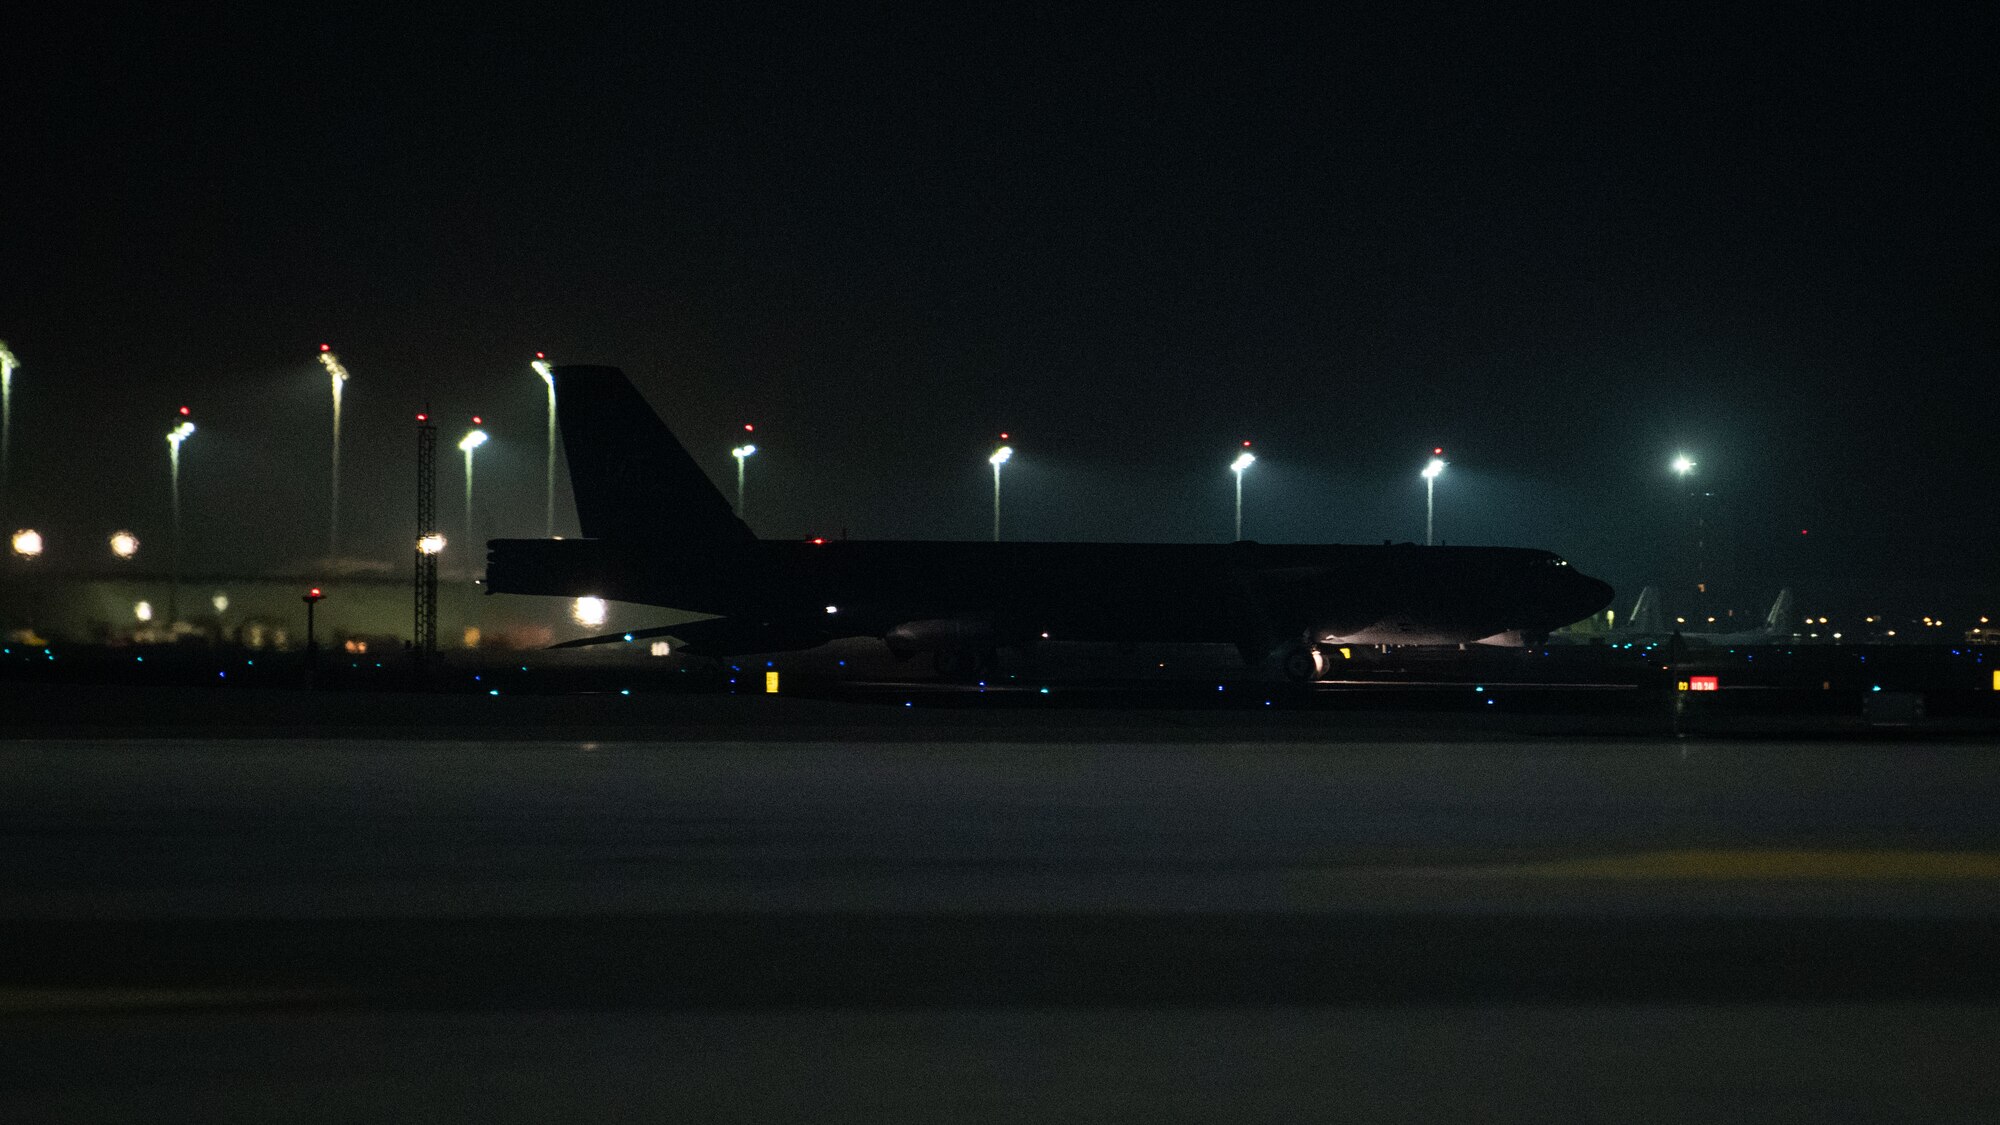 A B-52H Stratofortress assigned to the 5th Bomb Wing, Minot Air Force Base, N.D., taxis on the flightline April 23, 2021, at Al Udeid Air Base, Qatar. The B-52 aircraft are deployed to Al Udeid AB to protect U.S. and coalition forces as they conduct drawdown operations from Afghanistan. (U.S. Air Force photo by Staff Sgt. Greg Erwin)